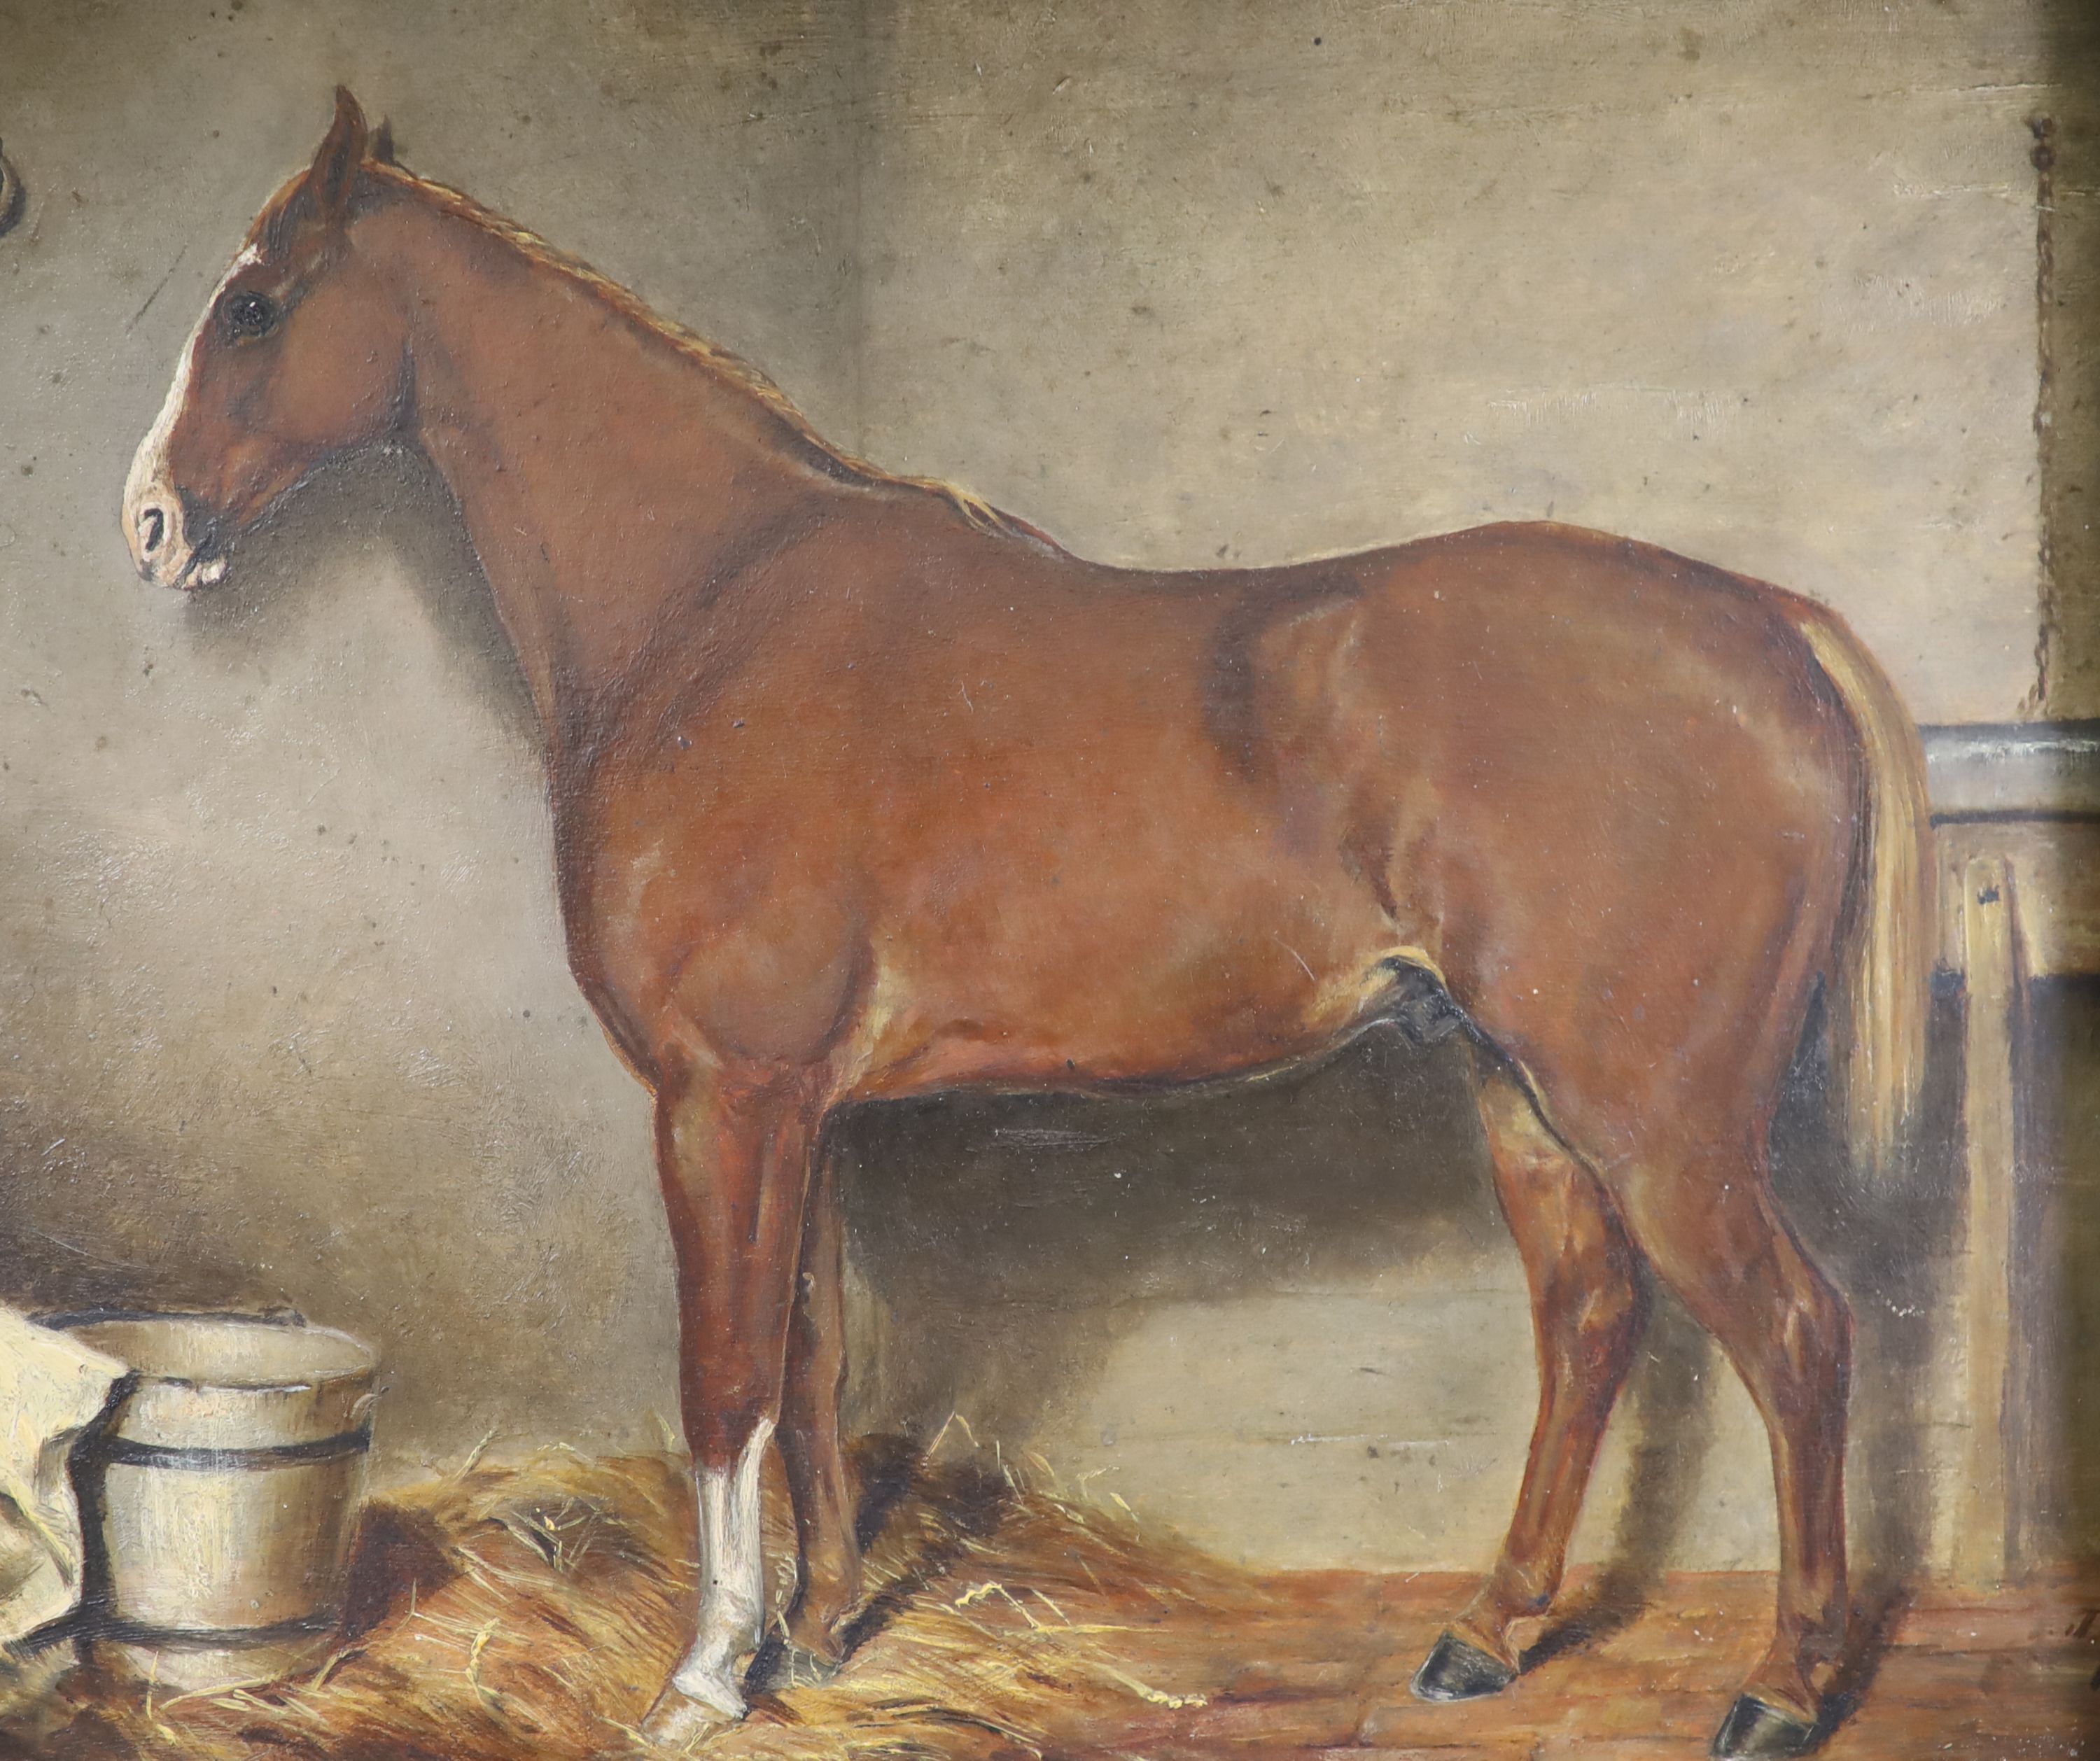 J. Danson (19thC), oil on board, Study of a horse in a stable, signed and dated 1881, 18 x 22cm